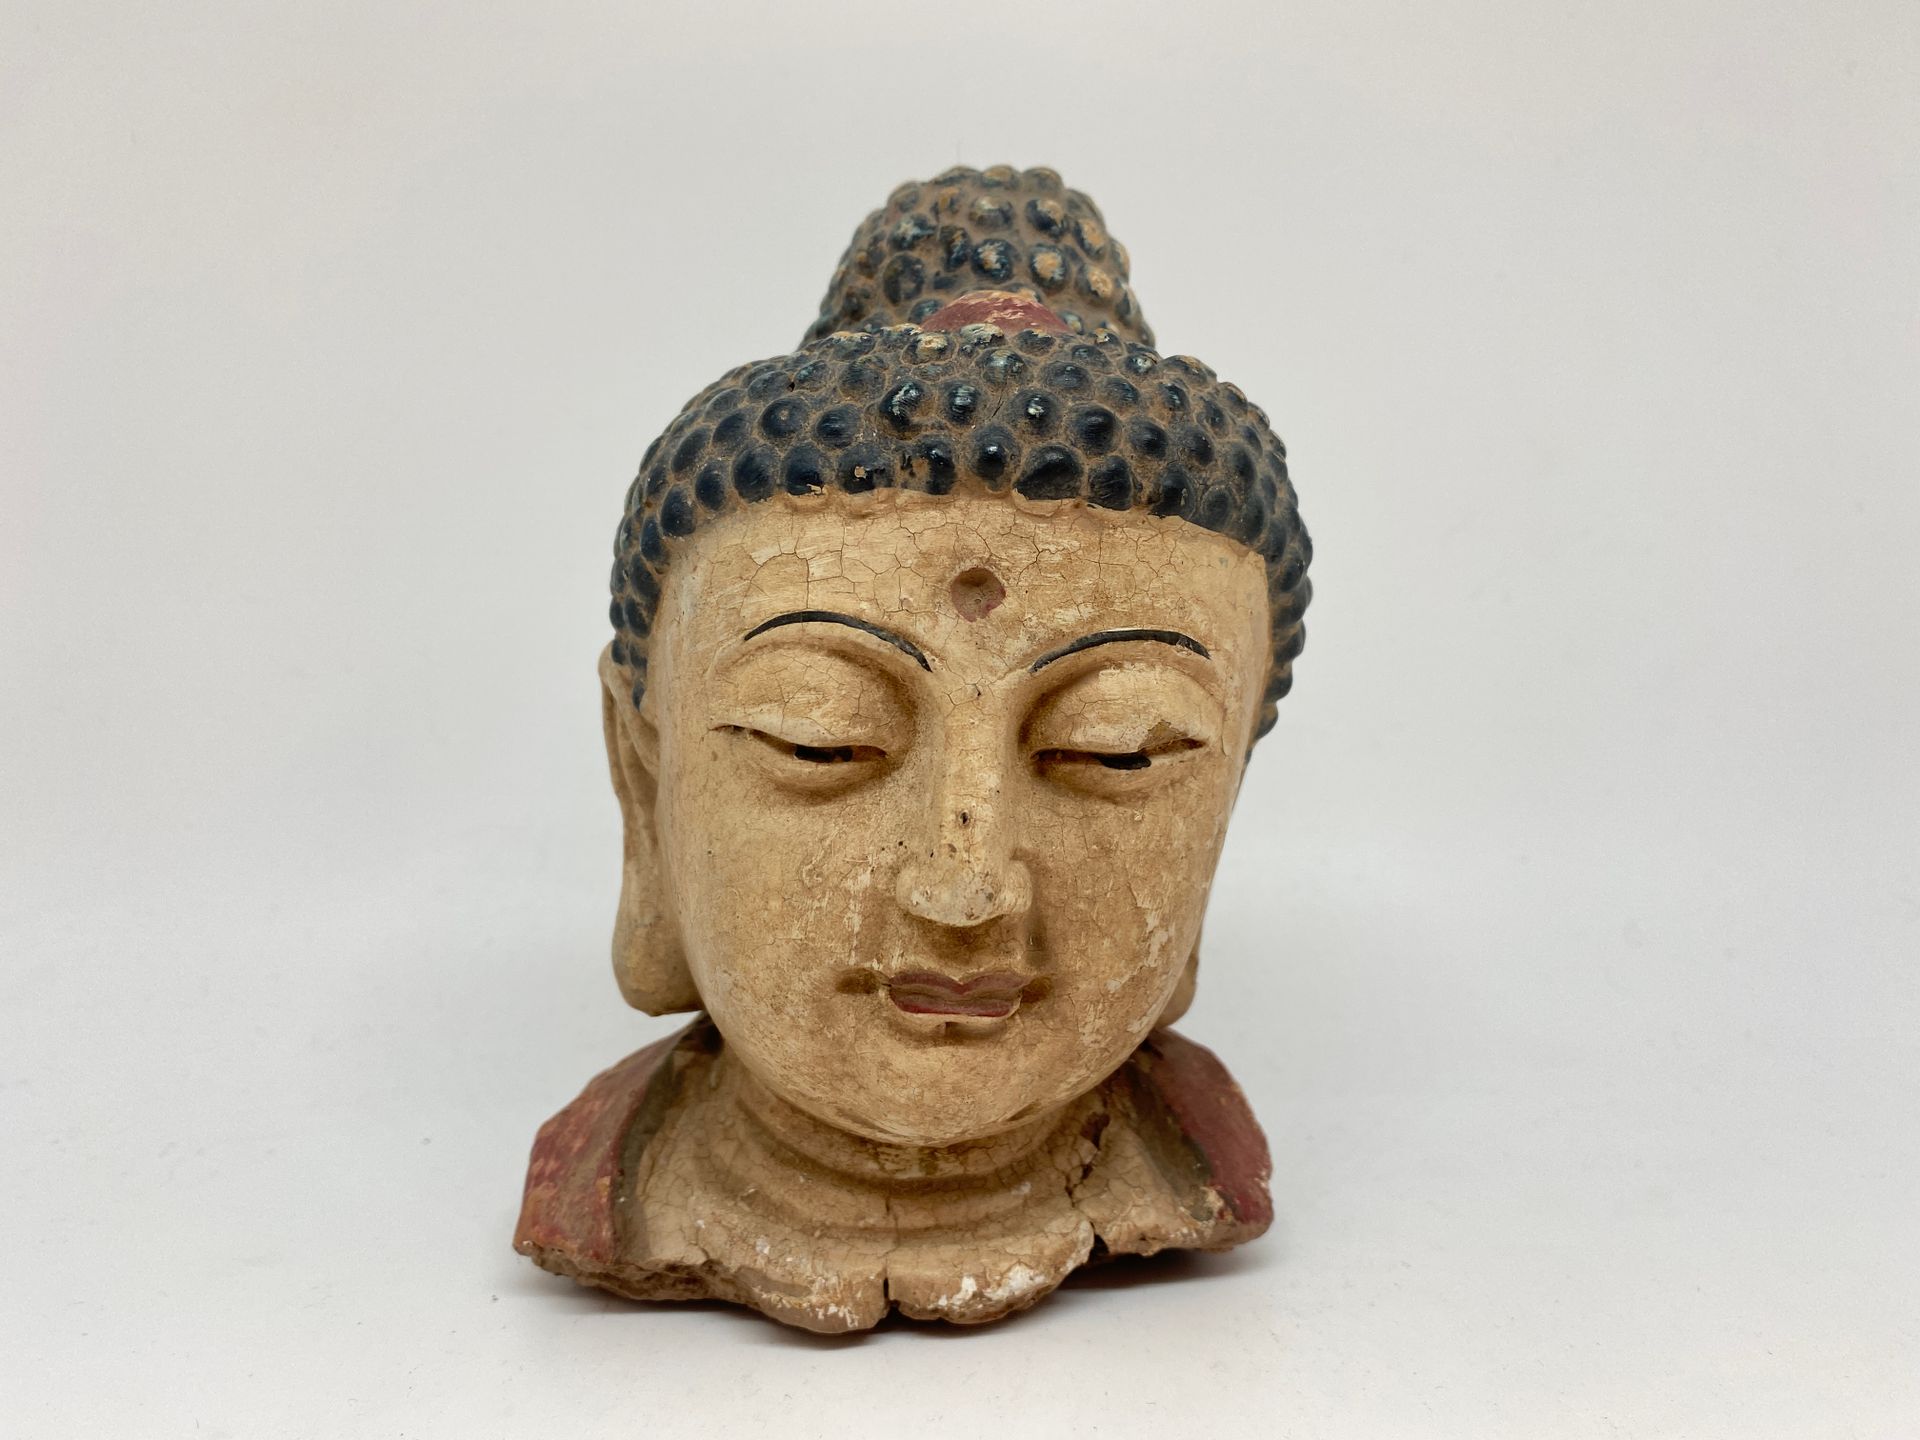 Null CHINA
Buddha head in polychrome sandstone.
H. 15 cm
(missing)